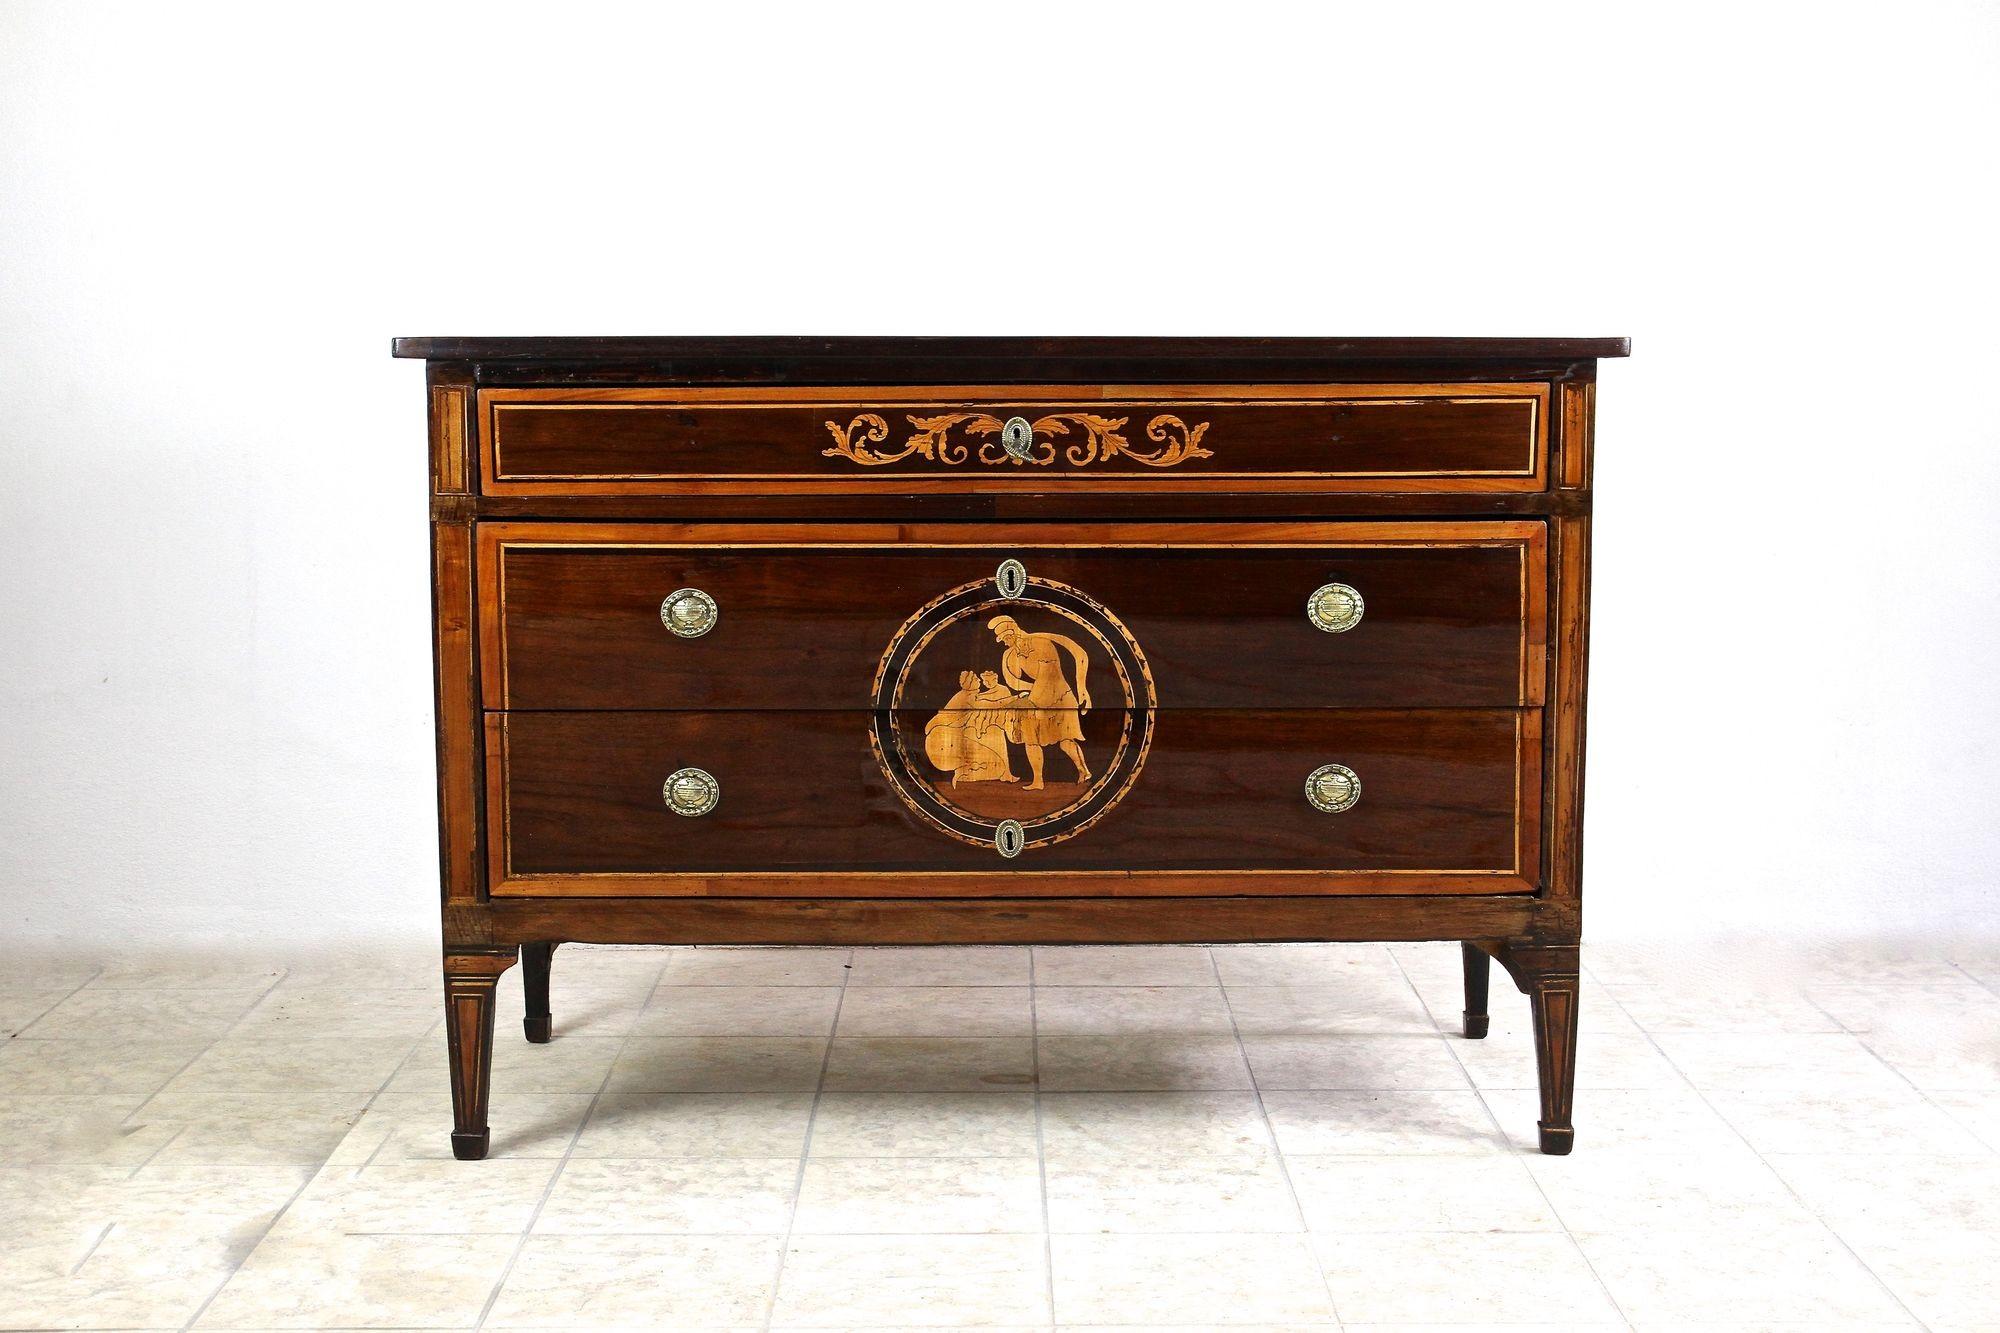 Exceptional, remarkable 18th century marquetry chest of drawers out of Italy, more precisely the Lombardy. Artfully crafted around 1780 with highest attention to details, this masterpiece of mid 18th century Italian craftsmanship is attributed to